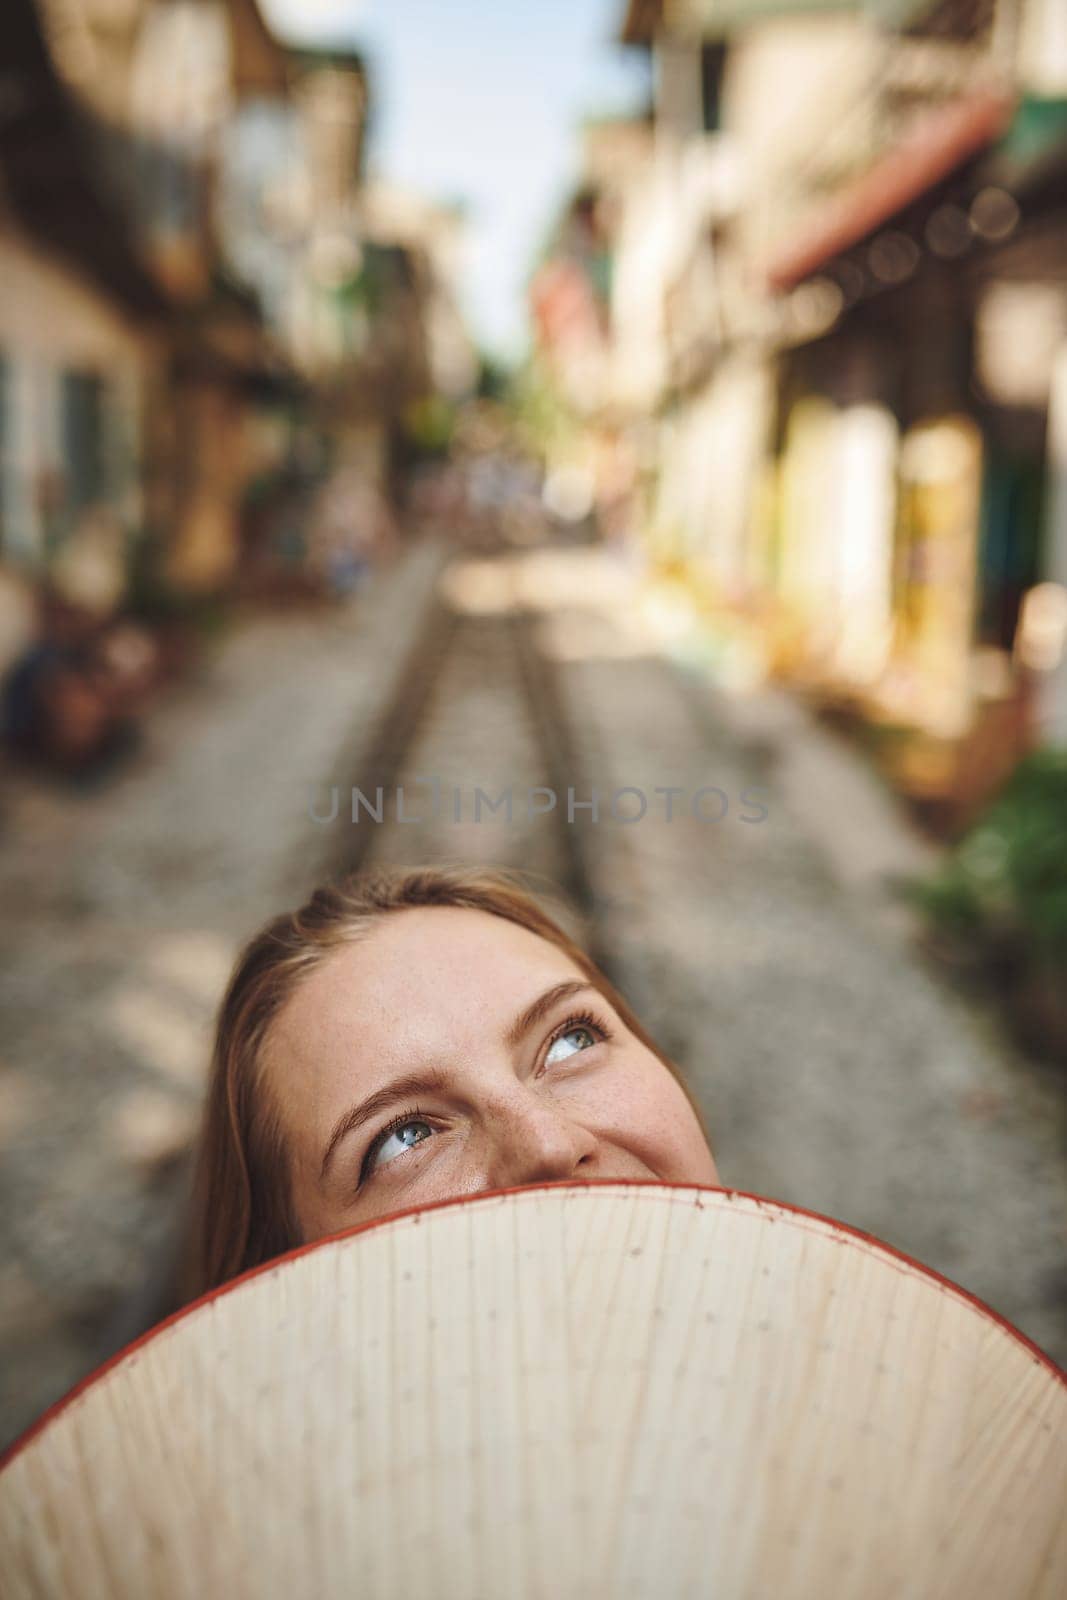 Travel means adventure. a woman holding a conical hat in front of her face